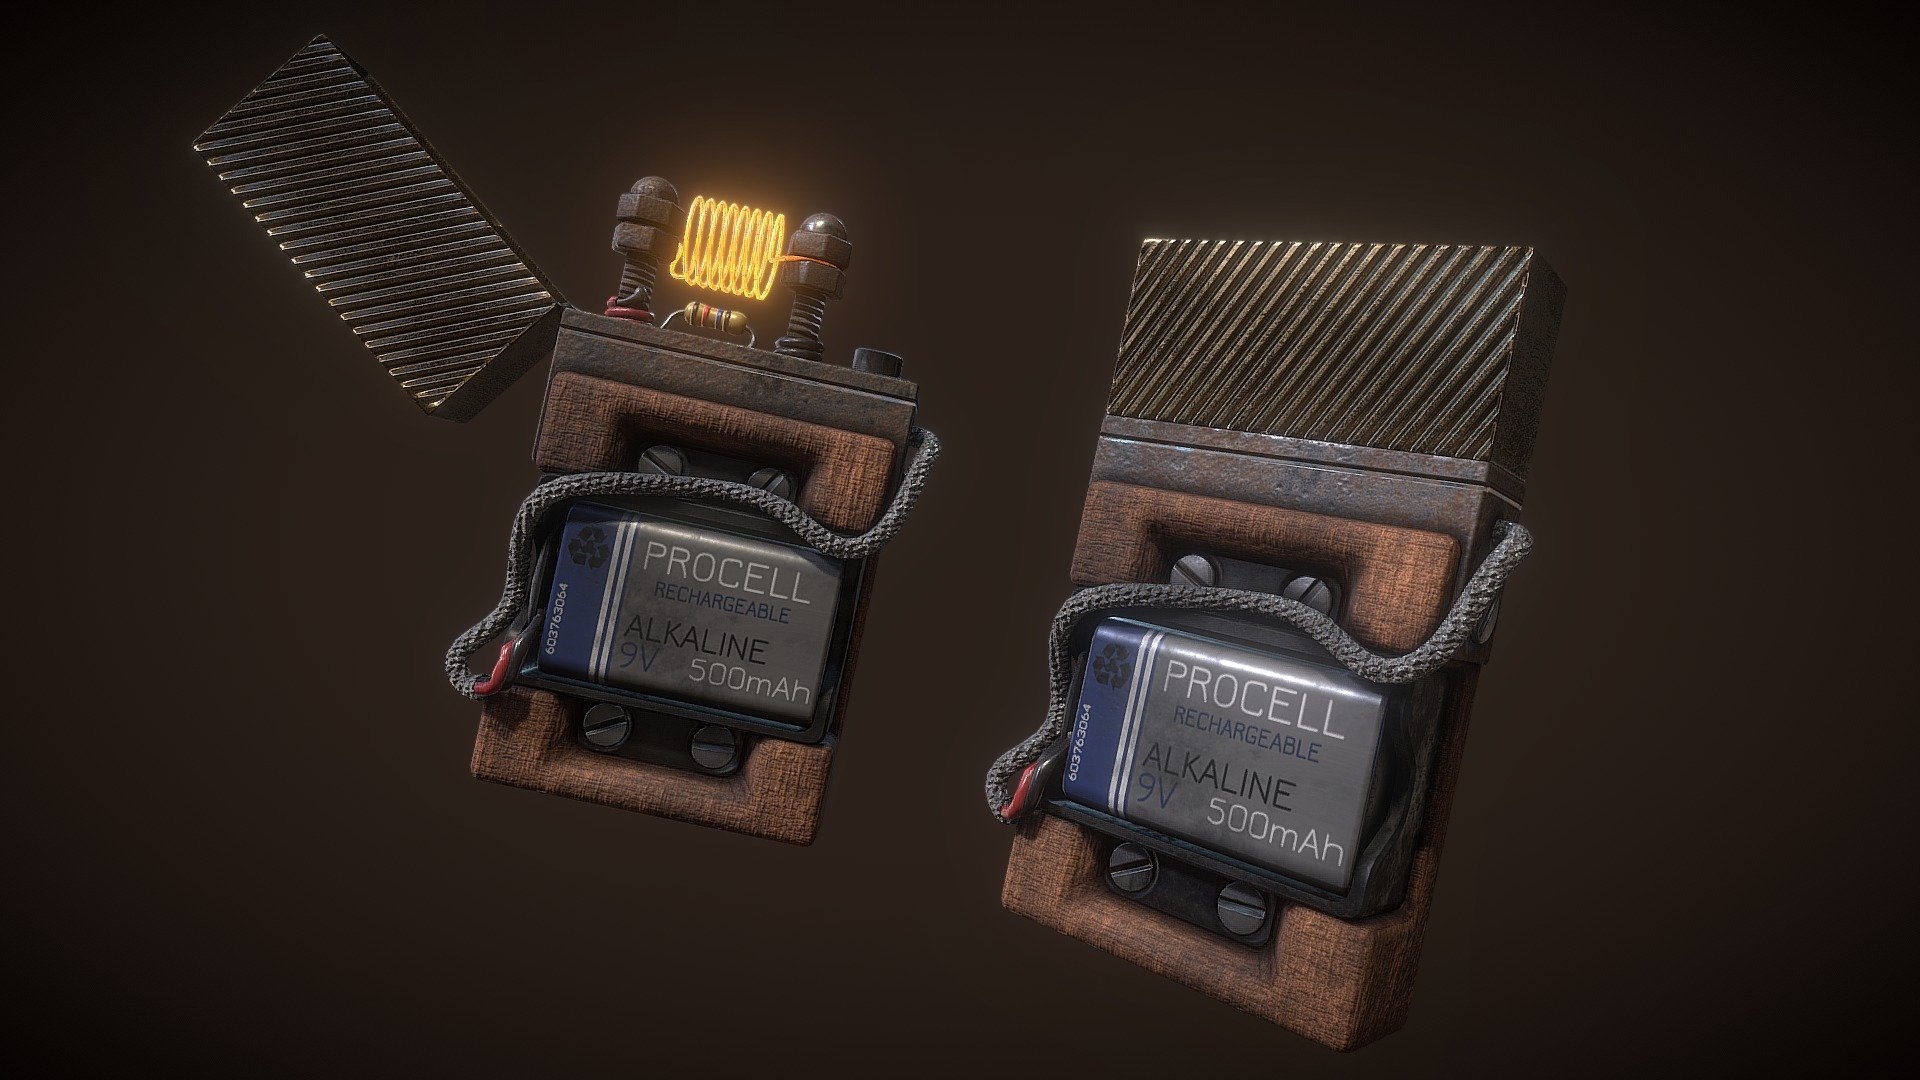 a salvaged, post apocalpytic style electric &lsquo;nichrome wire' lighter powered by a 9 volt battery 
modelled in maya 2017 textured in substance painter 2 - Salvaged 'nichrome' lighter - 3D model by Glennosaurus (@ghilby) 3d model